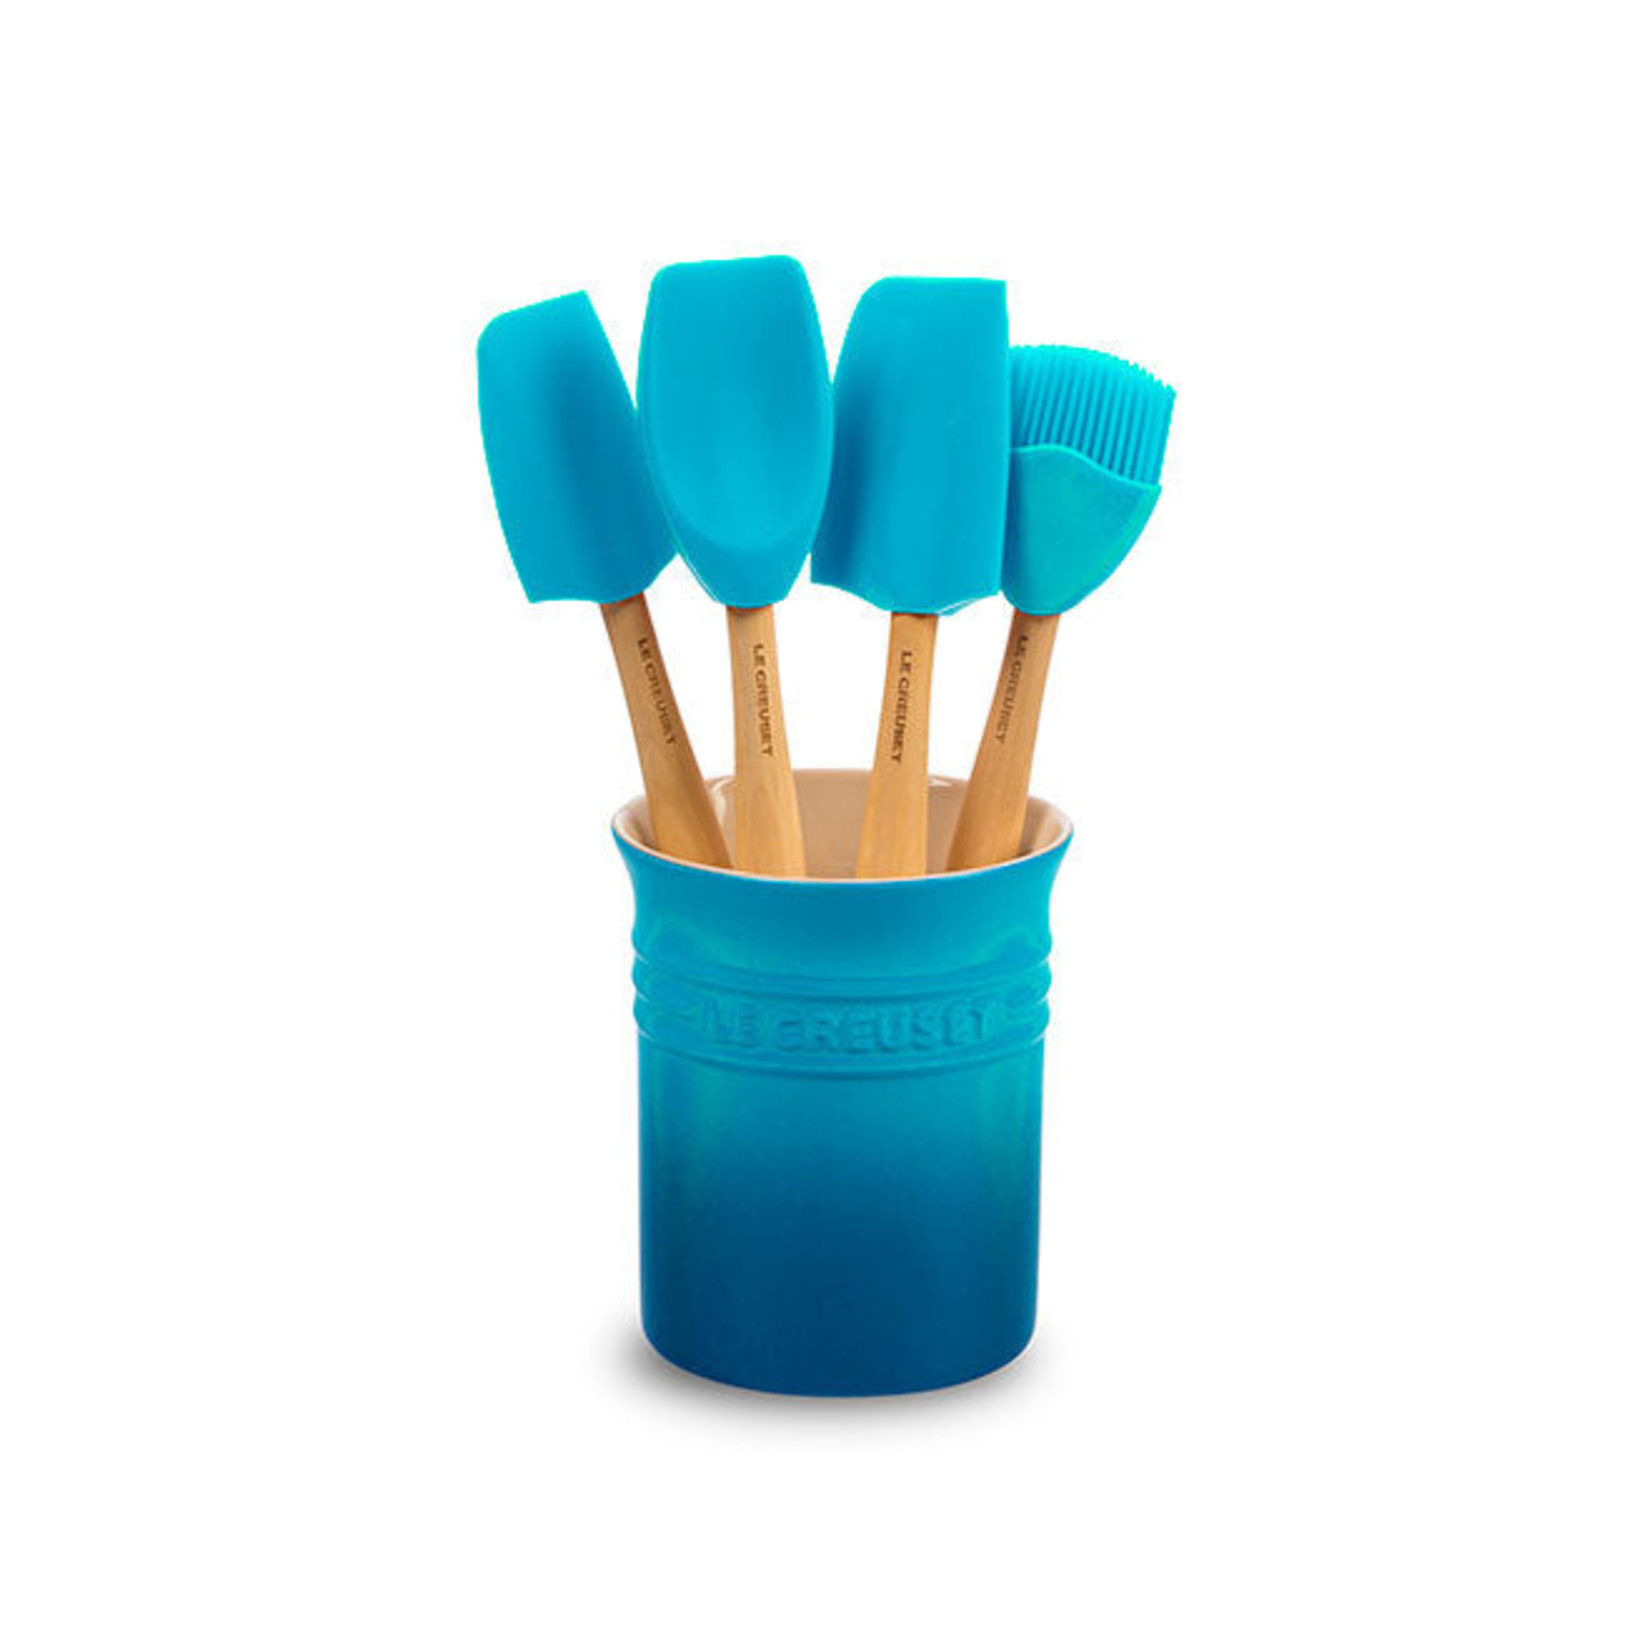 Craft Series 5 Piece Utensil Set With Crock By Le Creuset – Bella